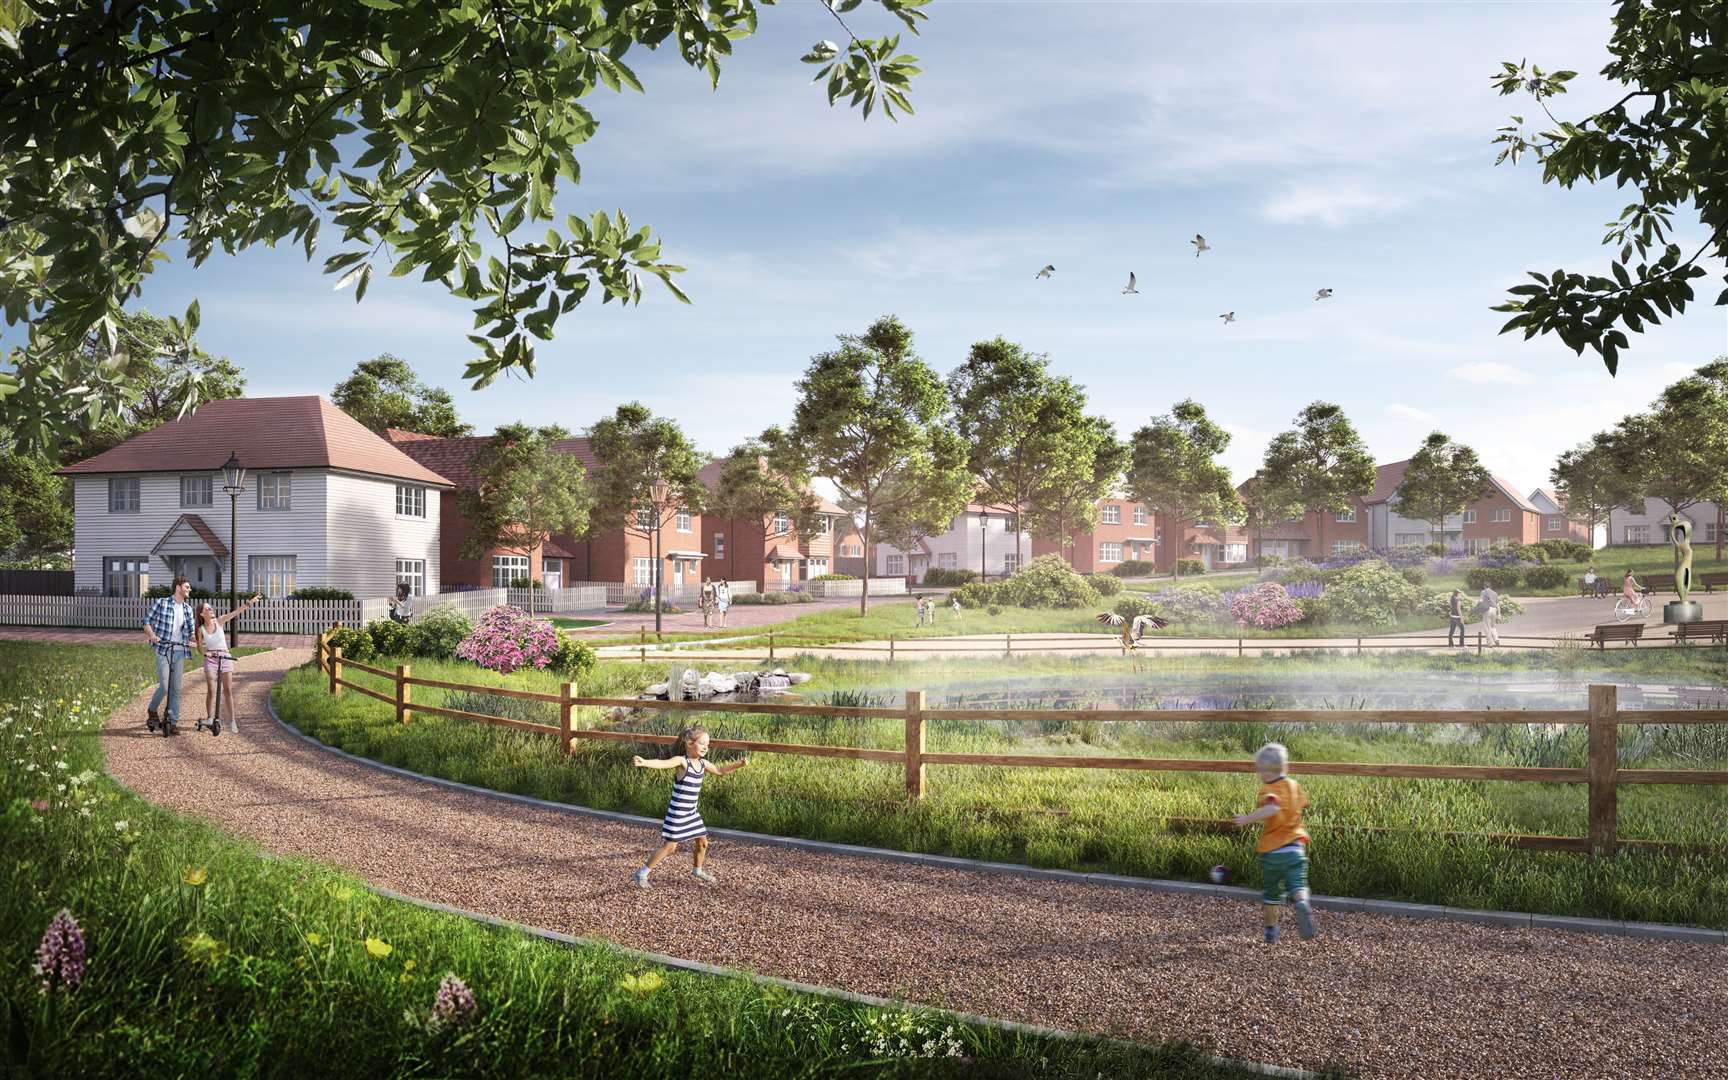 The Conningbrook Park application has seen more than 1,000 comments from residents and interested parties